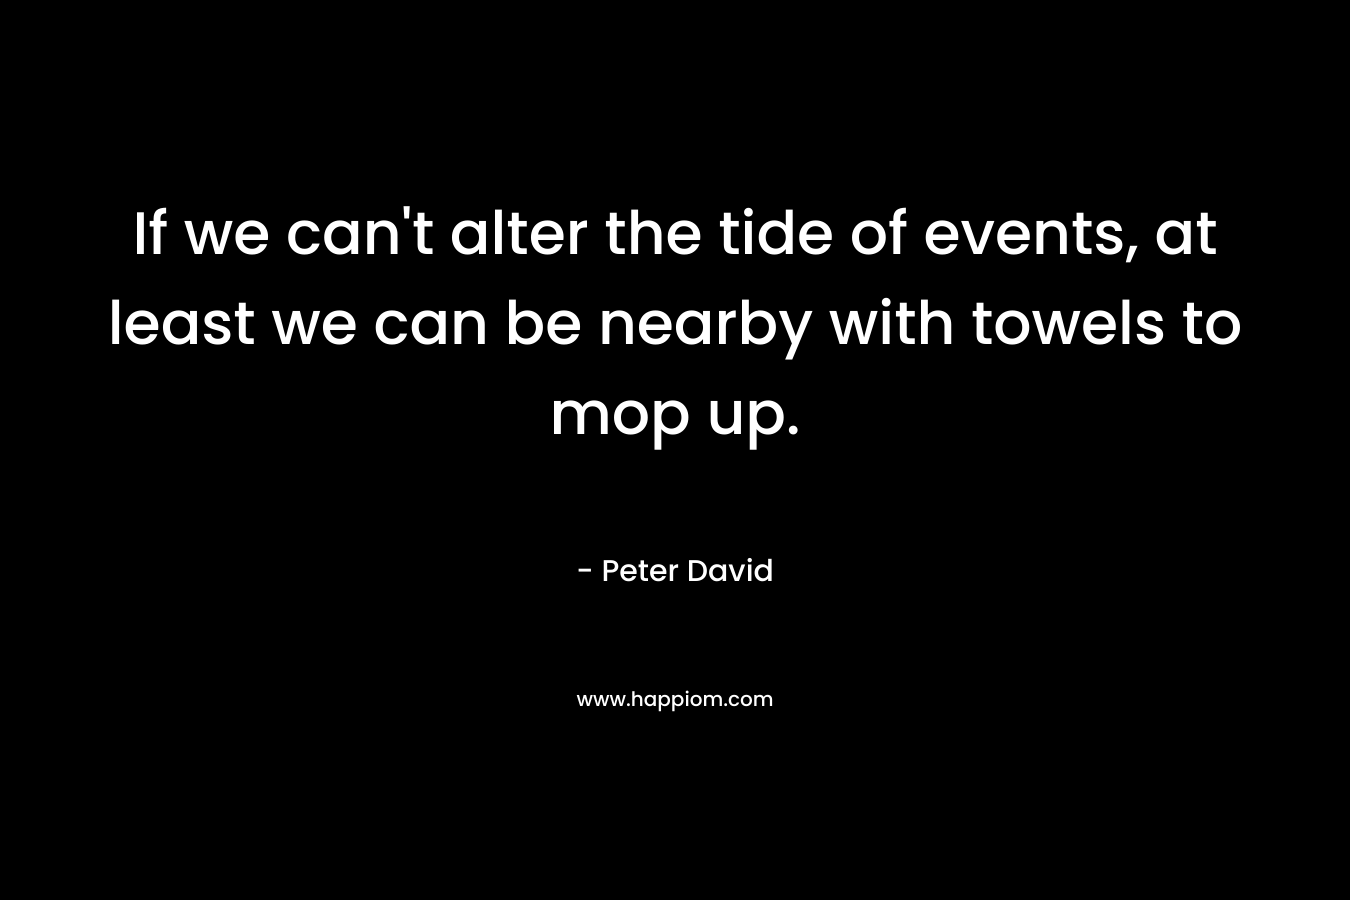 If we can’t alter the tide of events, at least we can be nearby with towels to mop up. – Peter David